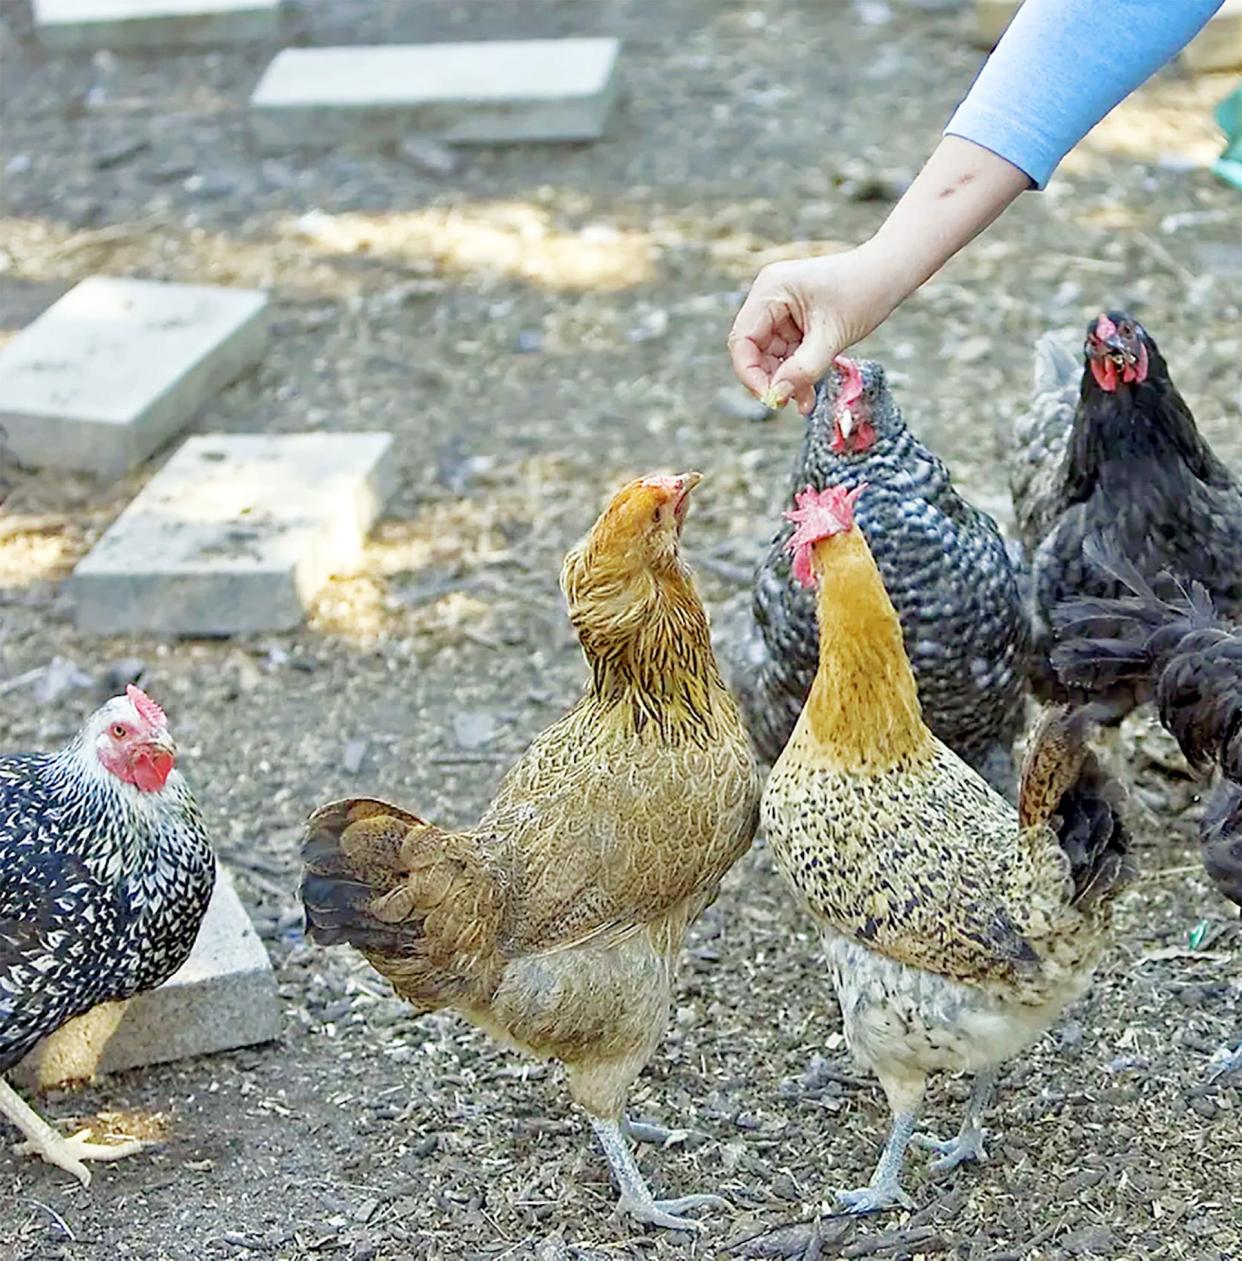 Today is National Poultry Day which includes domesticated birds such as chickens, ducks and more.